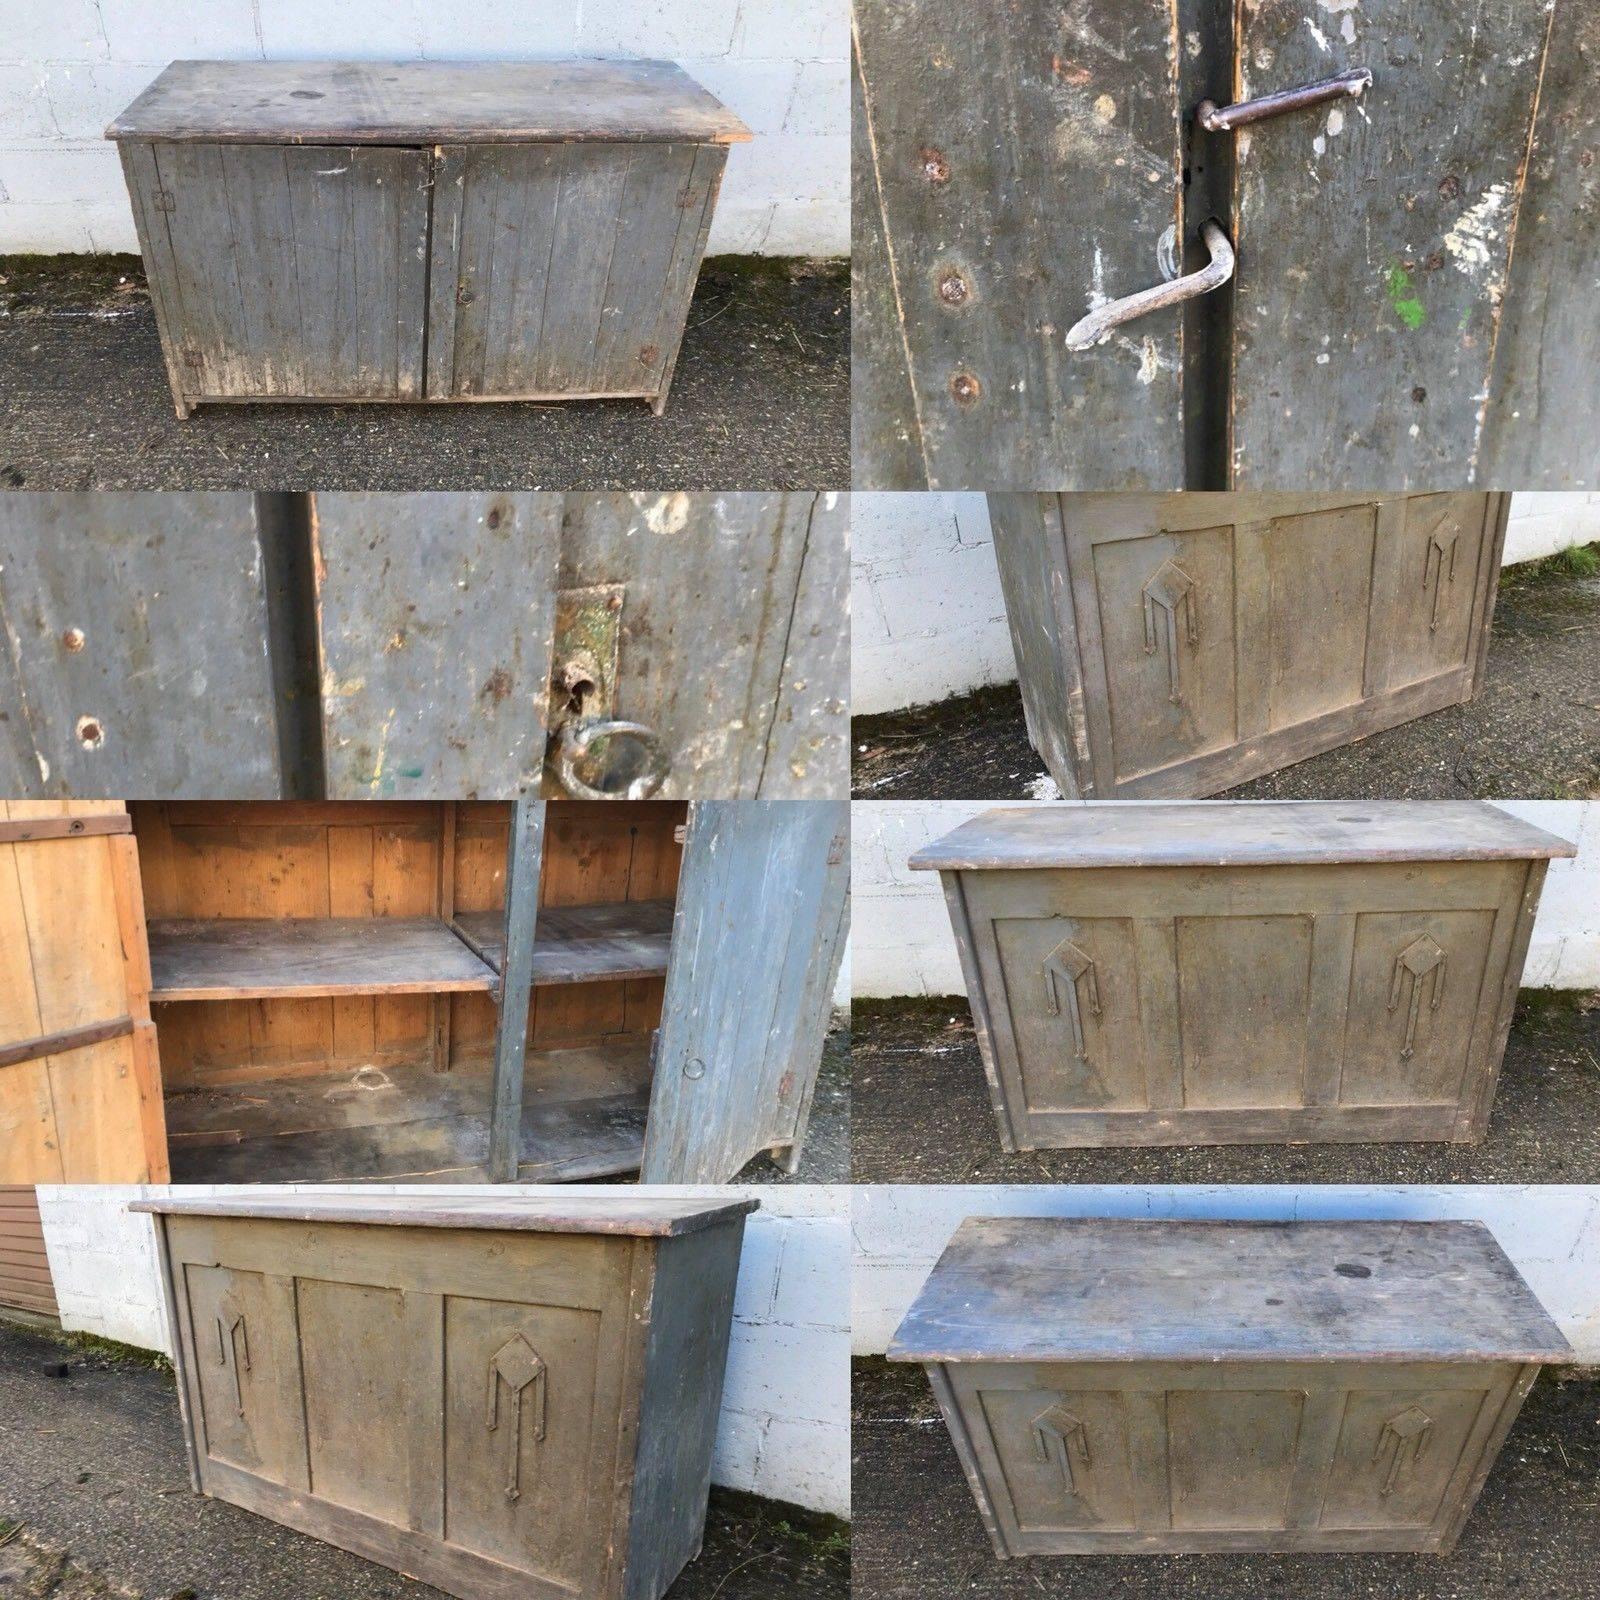 Here we have a fantastic French cupboard that oozes patina. It has a pair of doors one side that opens to reveal a shelving area. The other side has a decorated front. Which leads you to believe it was use as an island or counter, being double